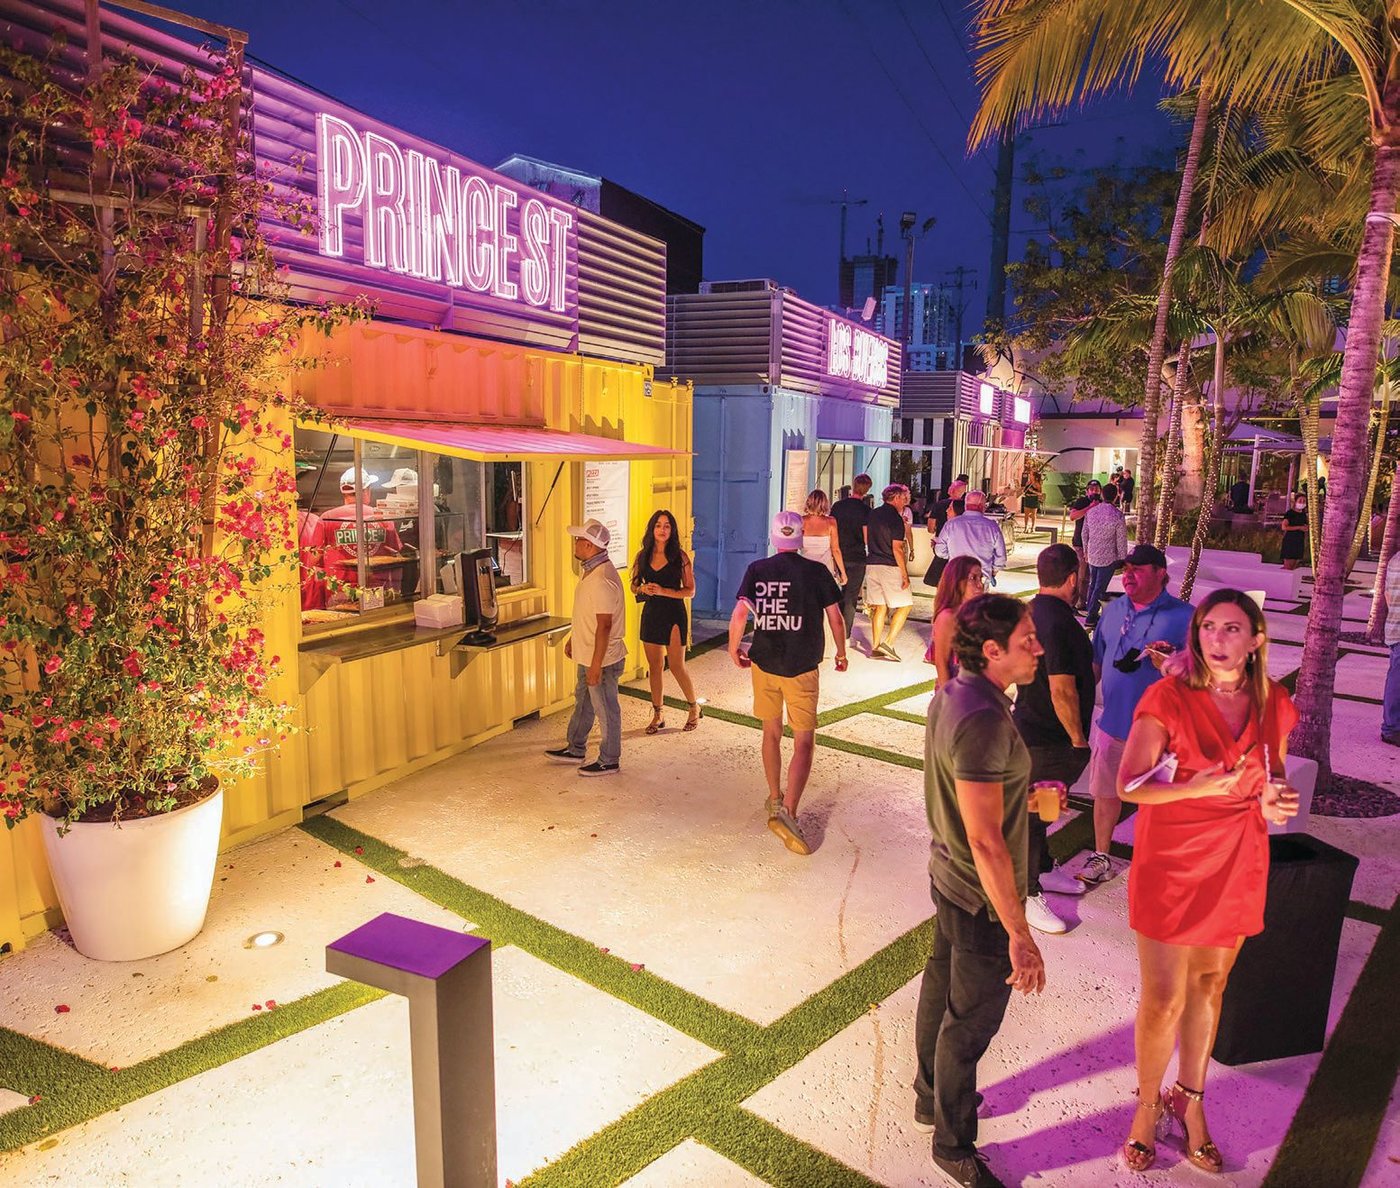 The exterior of Prince St. Pizza’s food stall at The Oasis Wynwood EXTERIOR PHOTO BY WORLD RED EYE